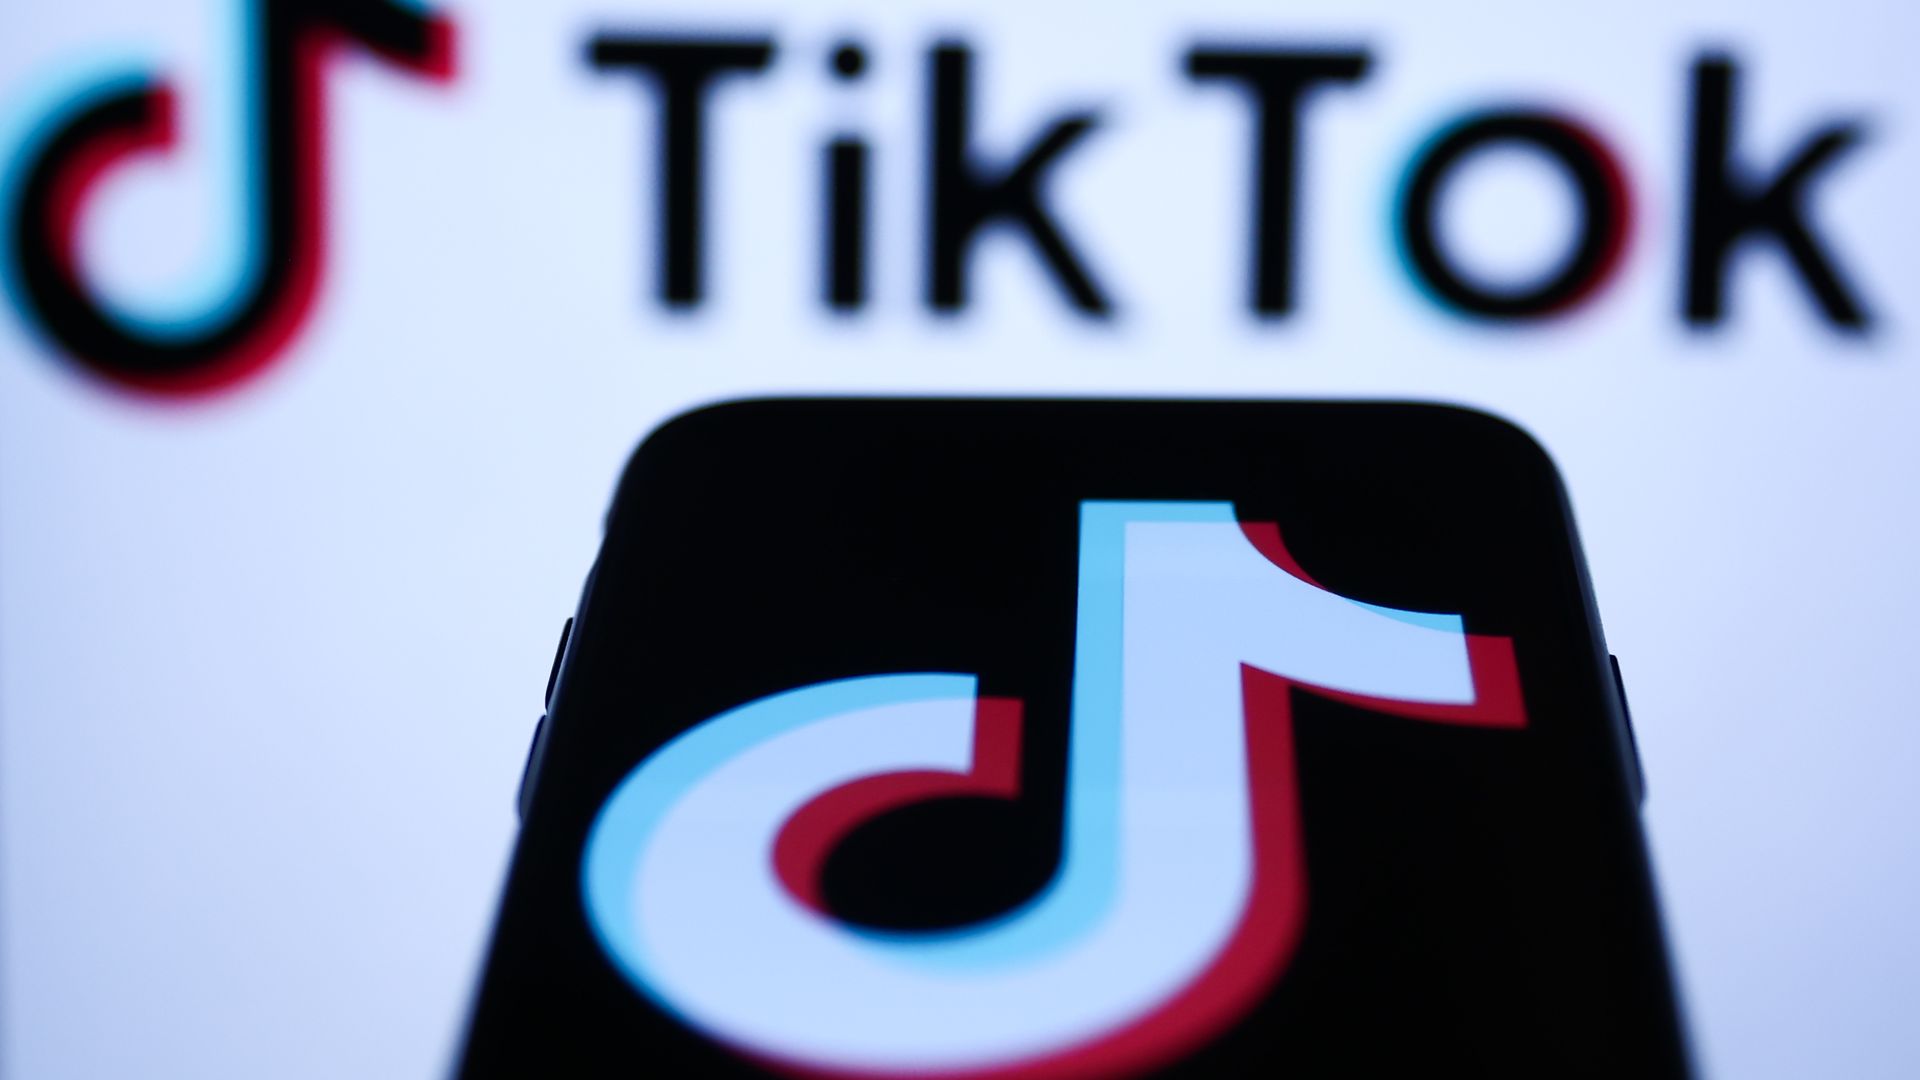 A cellphone with the TikTok logo on it.